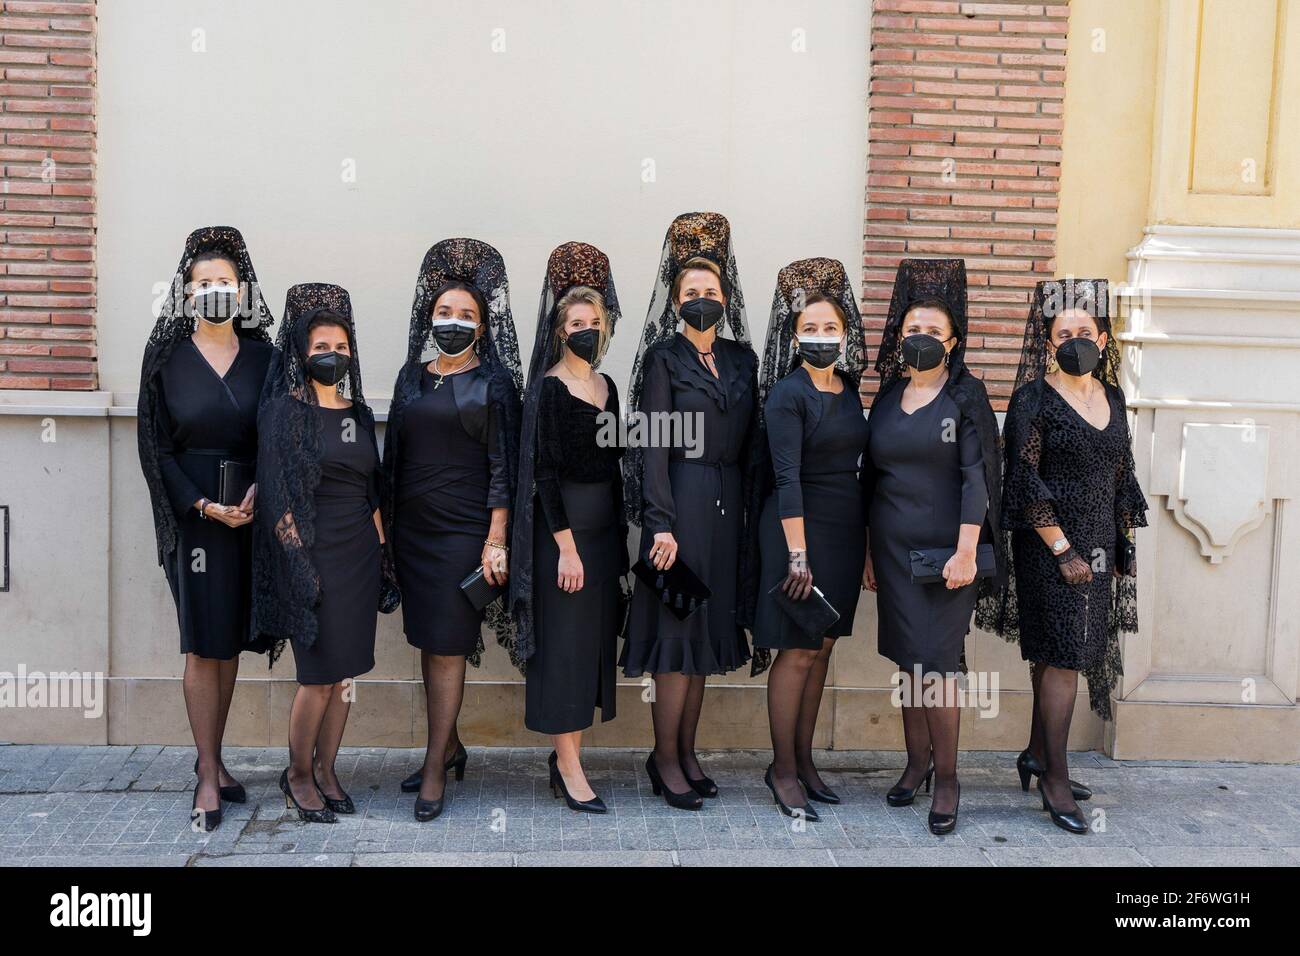 Malaga, Spain. 25th Mar, 2021. Women wearing mantilla dresses and face  masks pose for a photo during the Holy Friday. Traditionally in Spain,  women wear mantilla dresses as mourning clothes while they